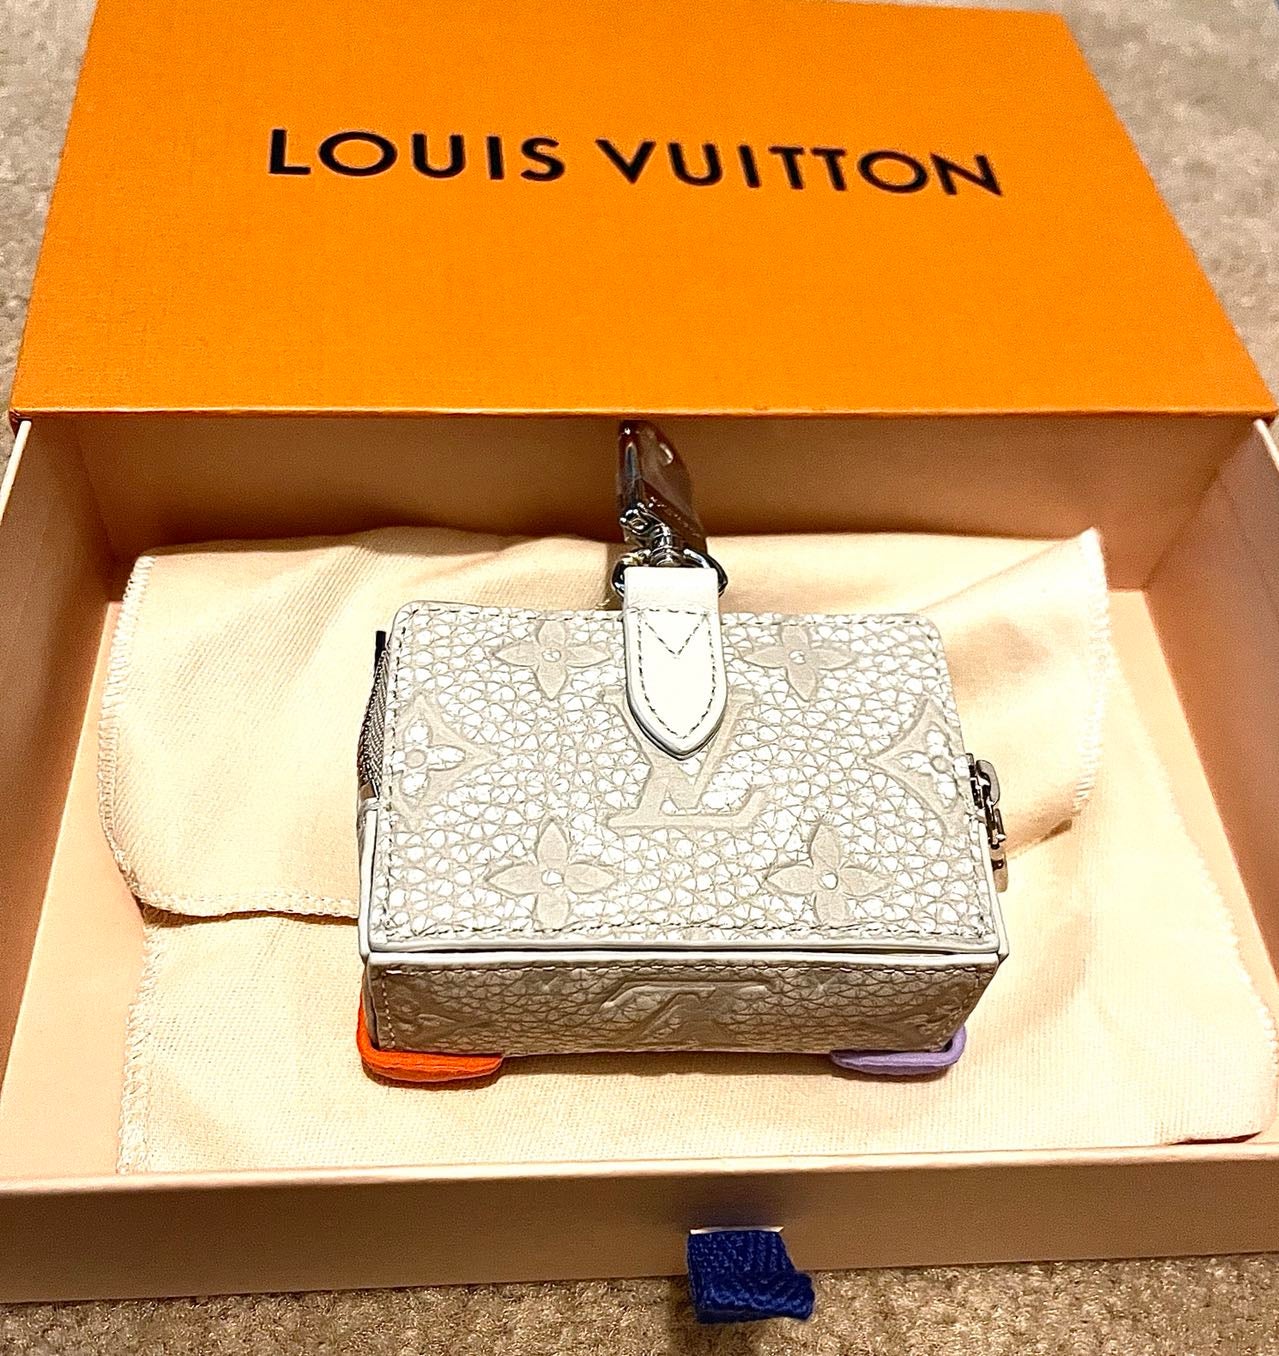 SOLD: LOUIS VUITTON MNG CLIMBING POUCH BAG CHARM & KEY HOLDER (NEW)